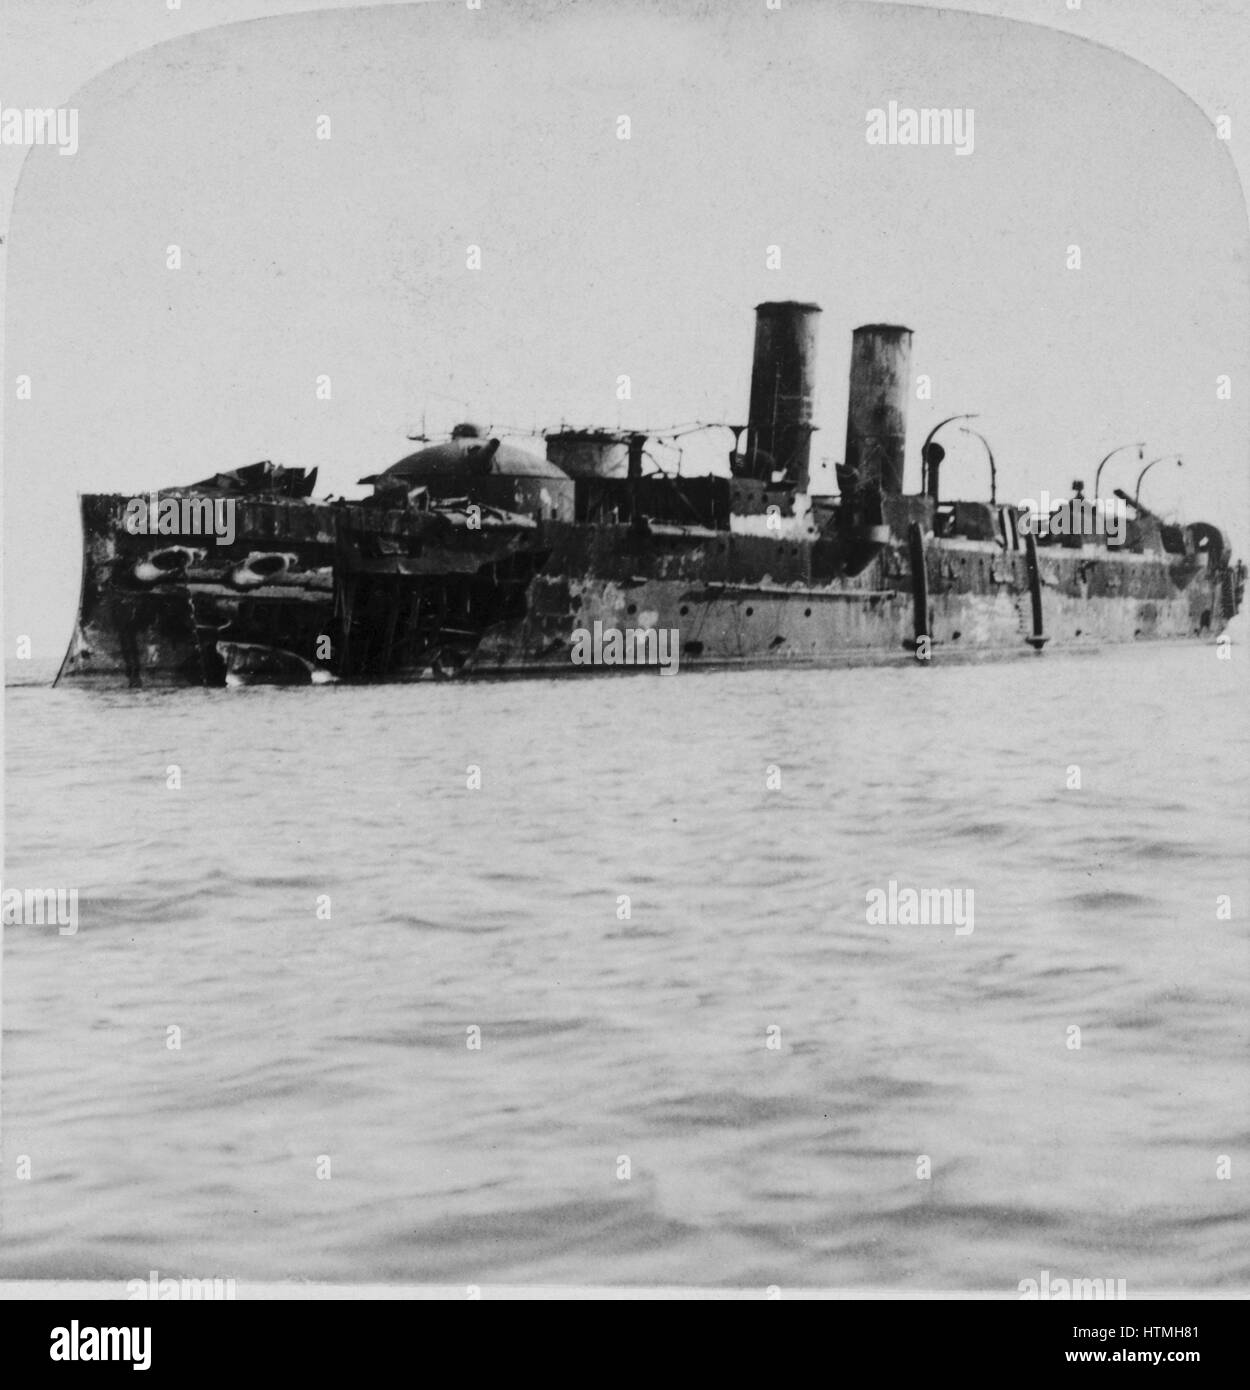 The Spanish 'Vizcaya' destroyed by American fleet- on the rocks off Cuba during the Spanish American War 1899. photographic print on stereo card : stereograph. Stock Photo